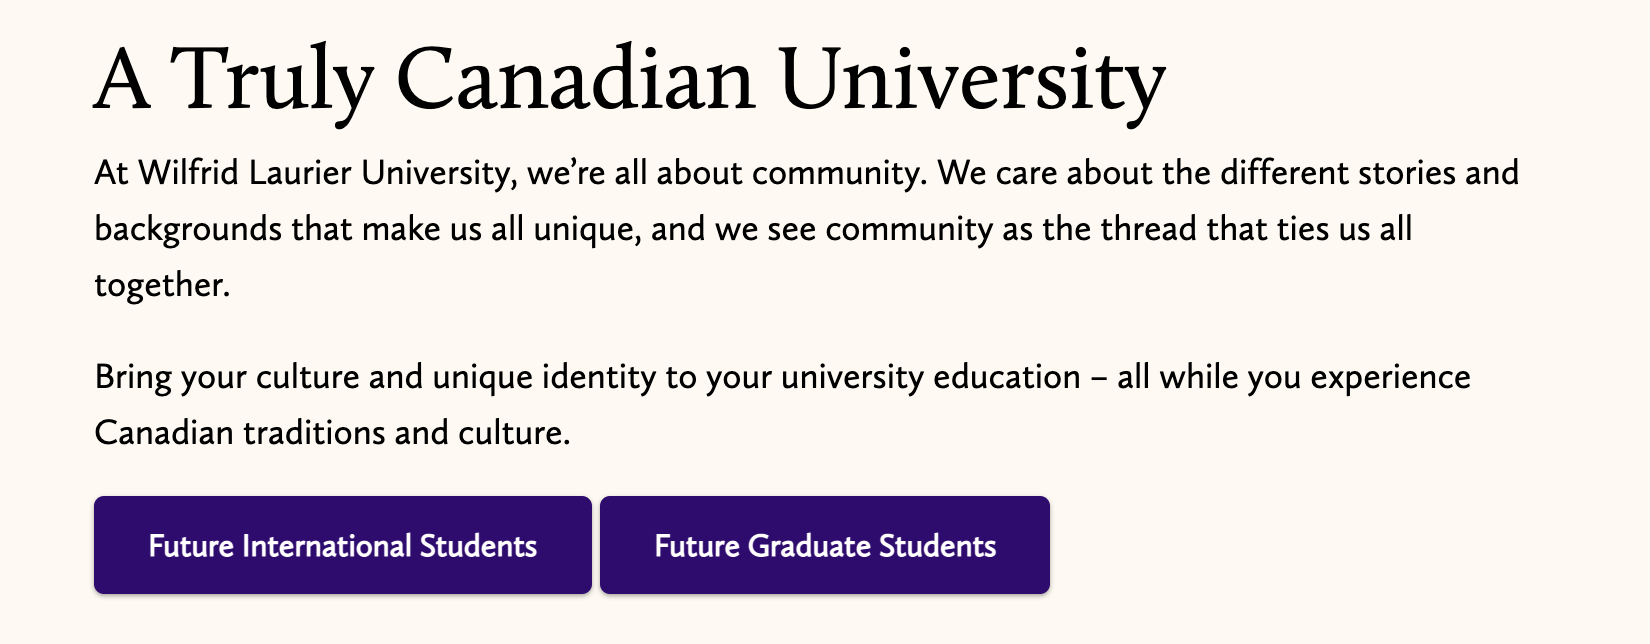 laurier-banner2-personalization.png